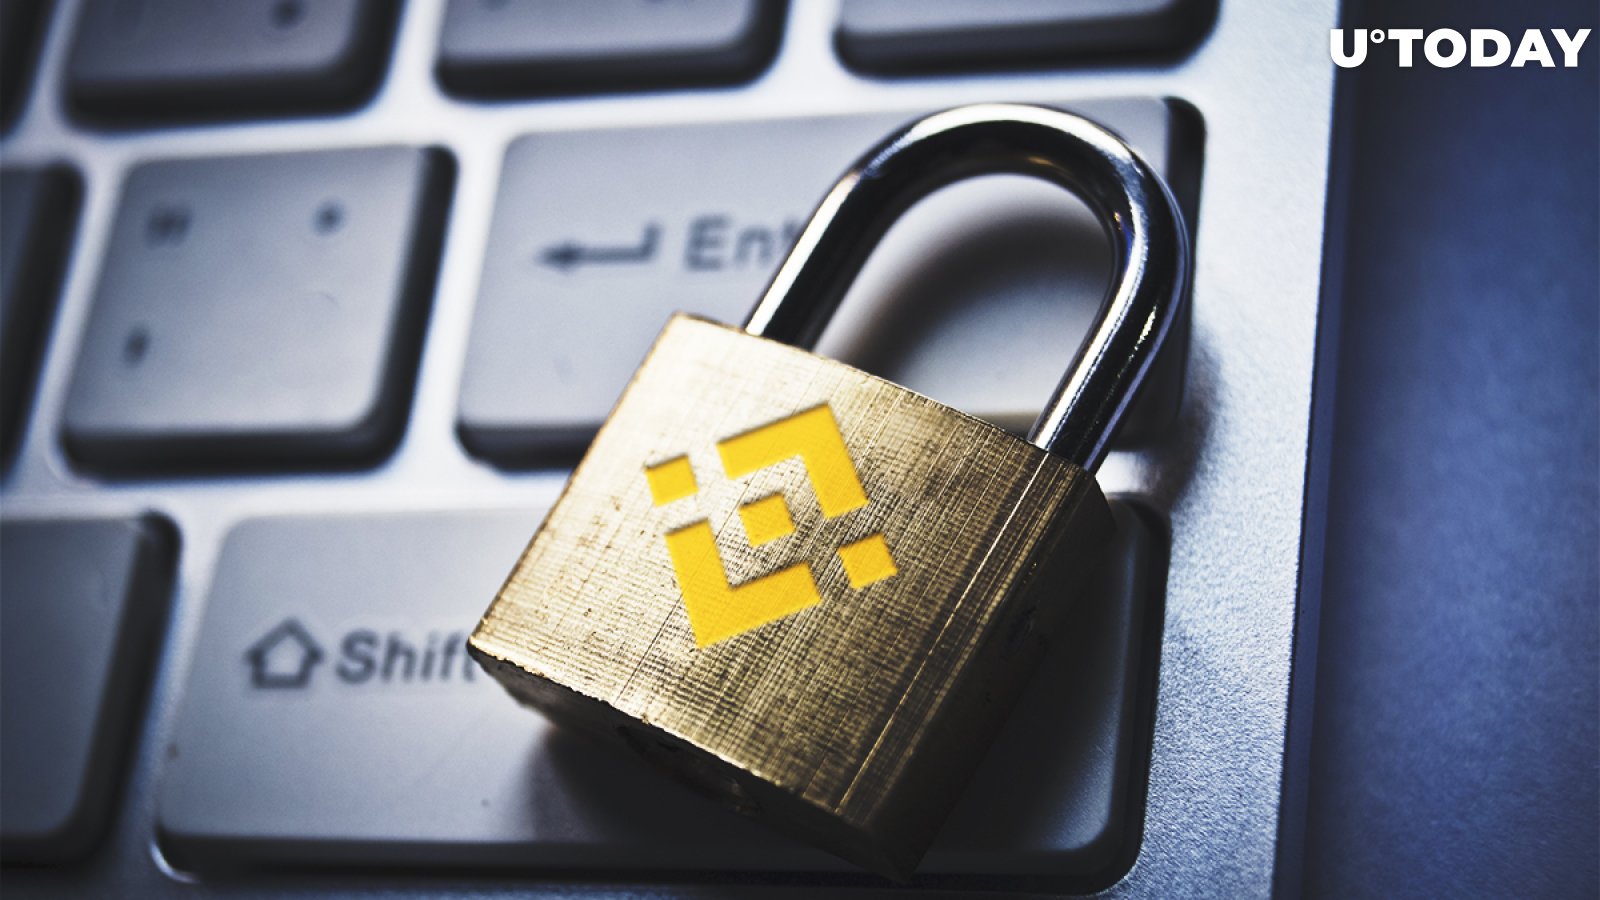 Binance’s CZ to Maintain Secrecy on Fixing Hackers’ Attack Aftermath